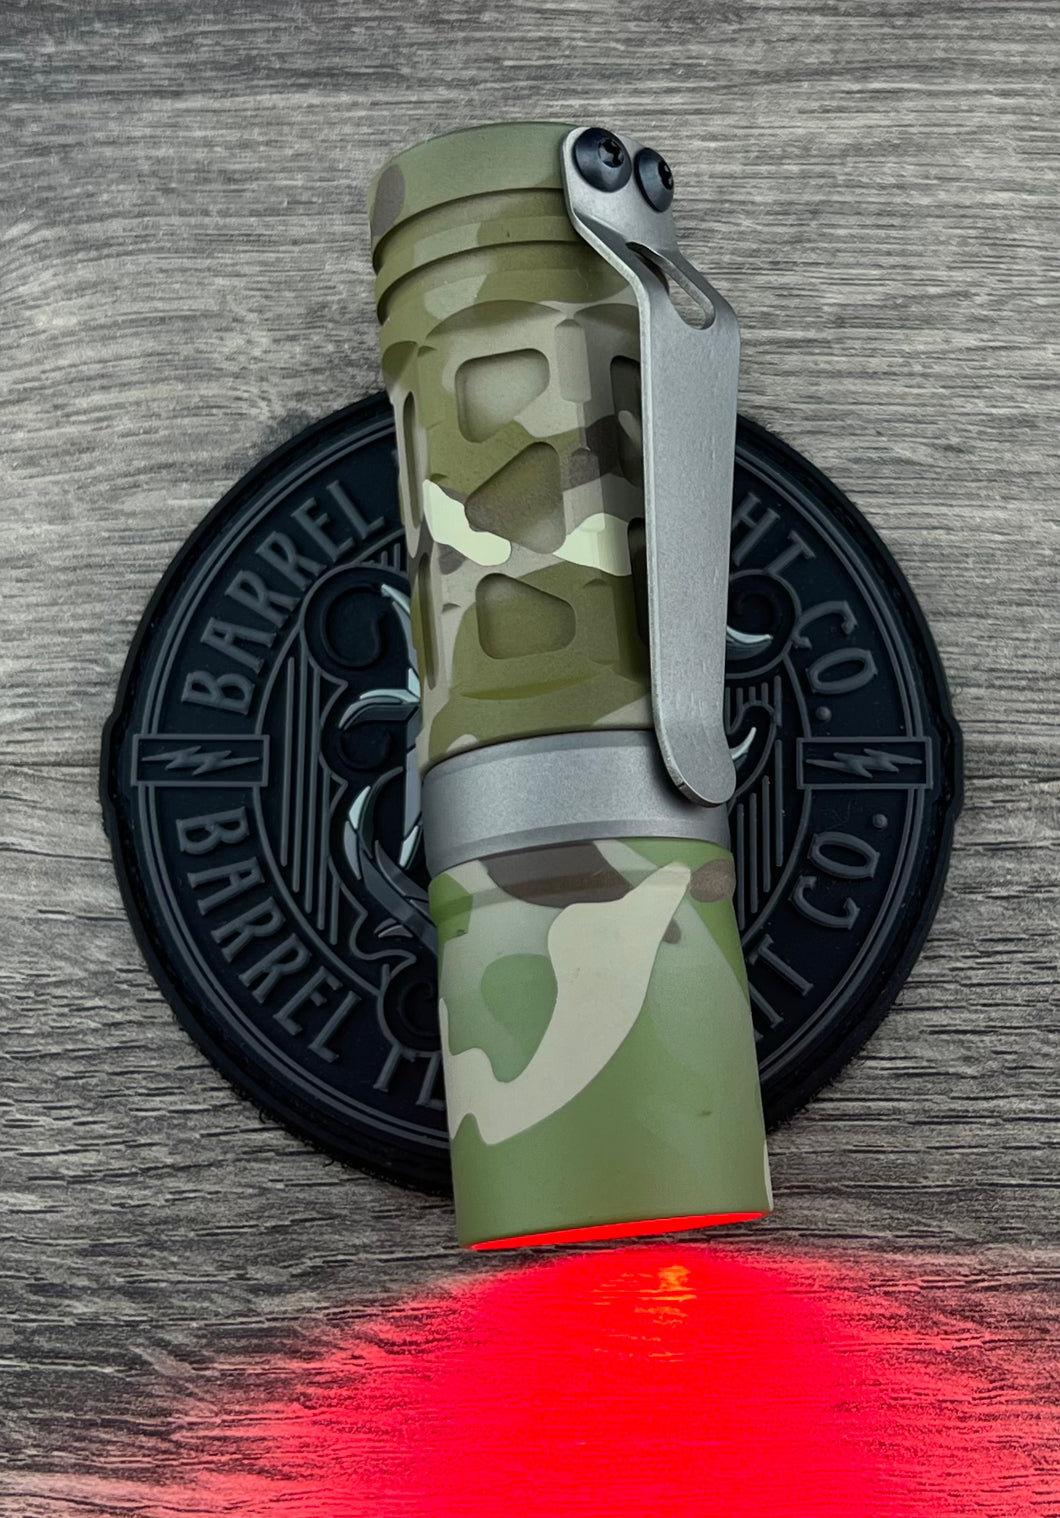 Barrel 3 Picatinny Non Vented Aluminum Rail MultiCam Dragon Driver with Red Secondary. Grey Cerakote Ring and Clip.